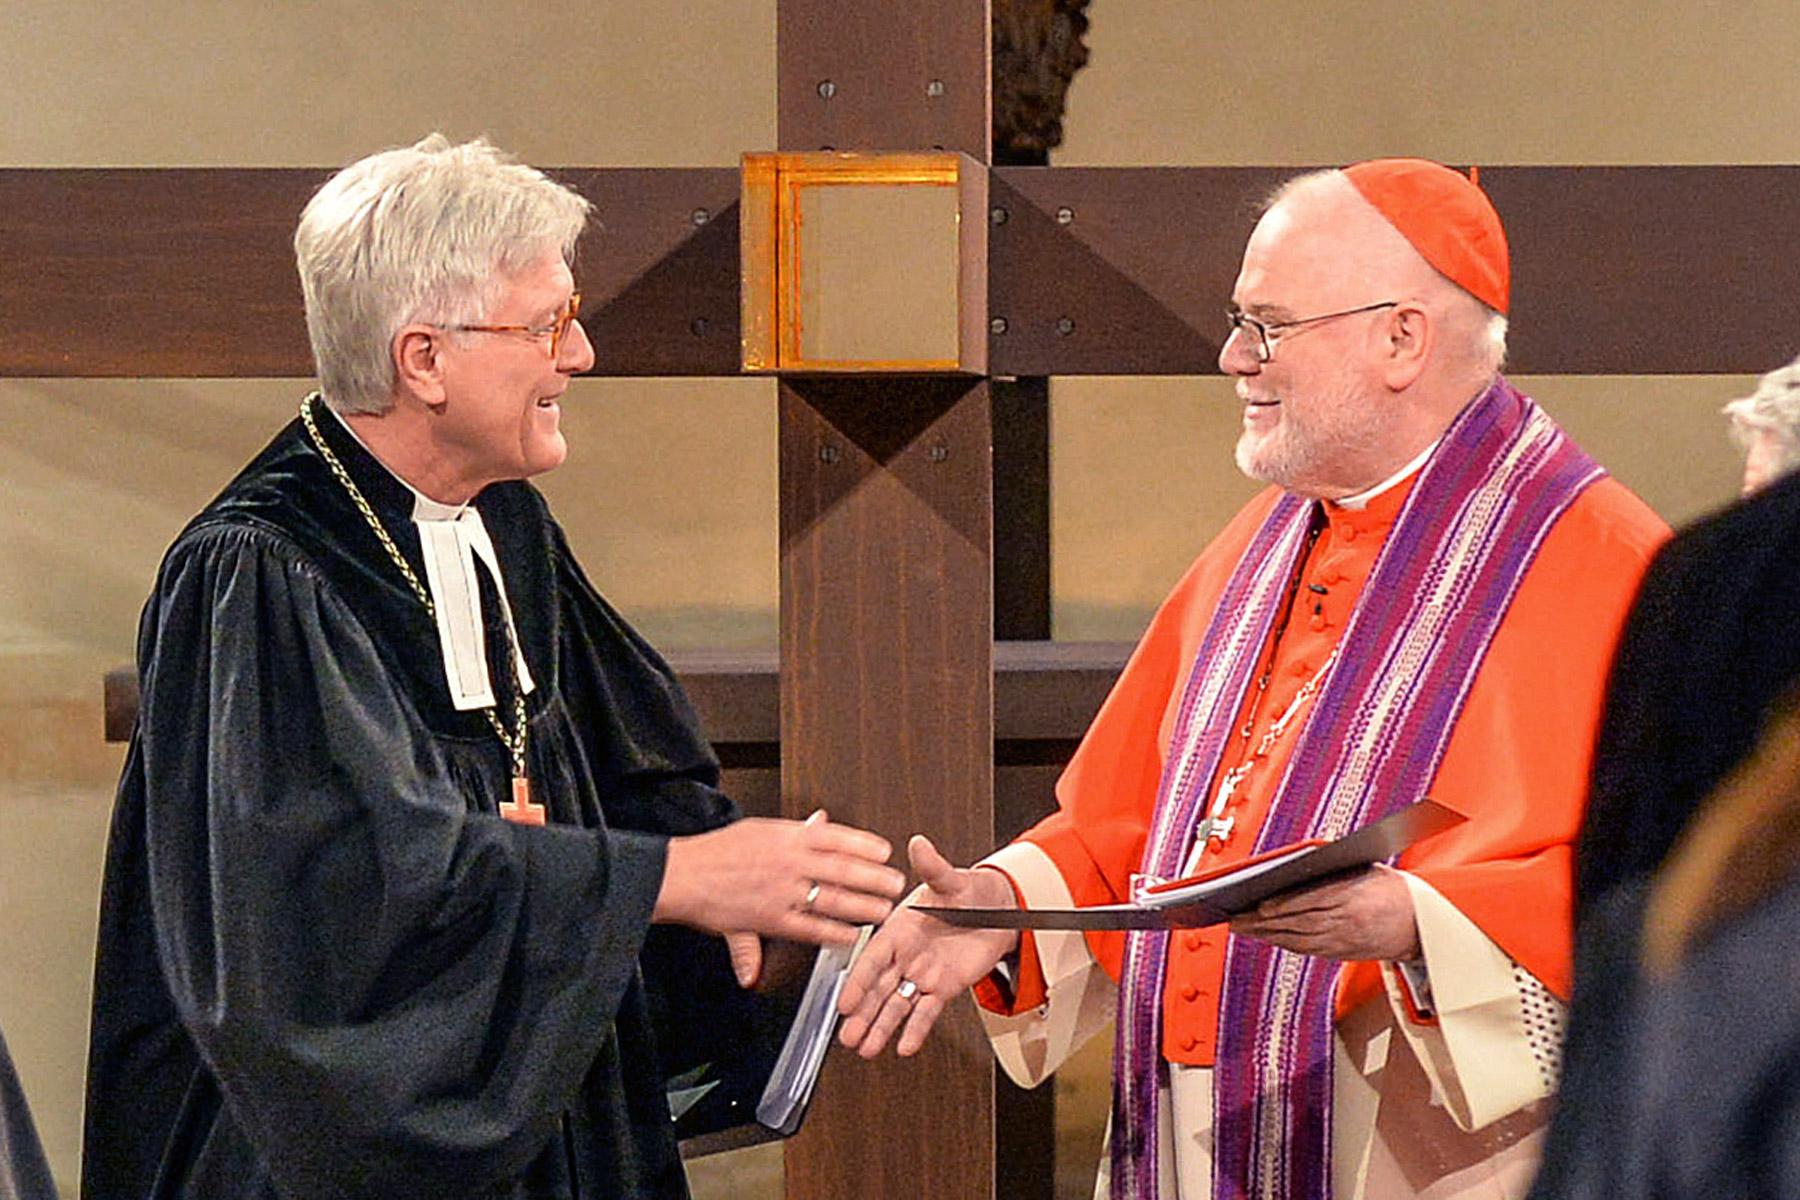 The Bavarian Bishop and EKD Council Chairperson Heinrich Bedford-Strohm (left) and the Chairperson of the Catholic German Bishops' Conference, Cardinal Reinhard Marx, exchanging a sign of peace during the service of reconciliation taking place in Hildesheim, Germany, in during the 2017 Reformation commemoration. Photo: epd/Jens Schulze